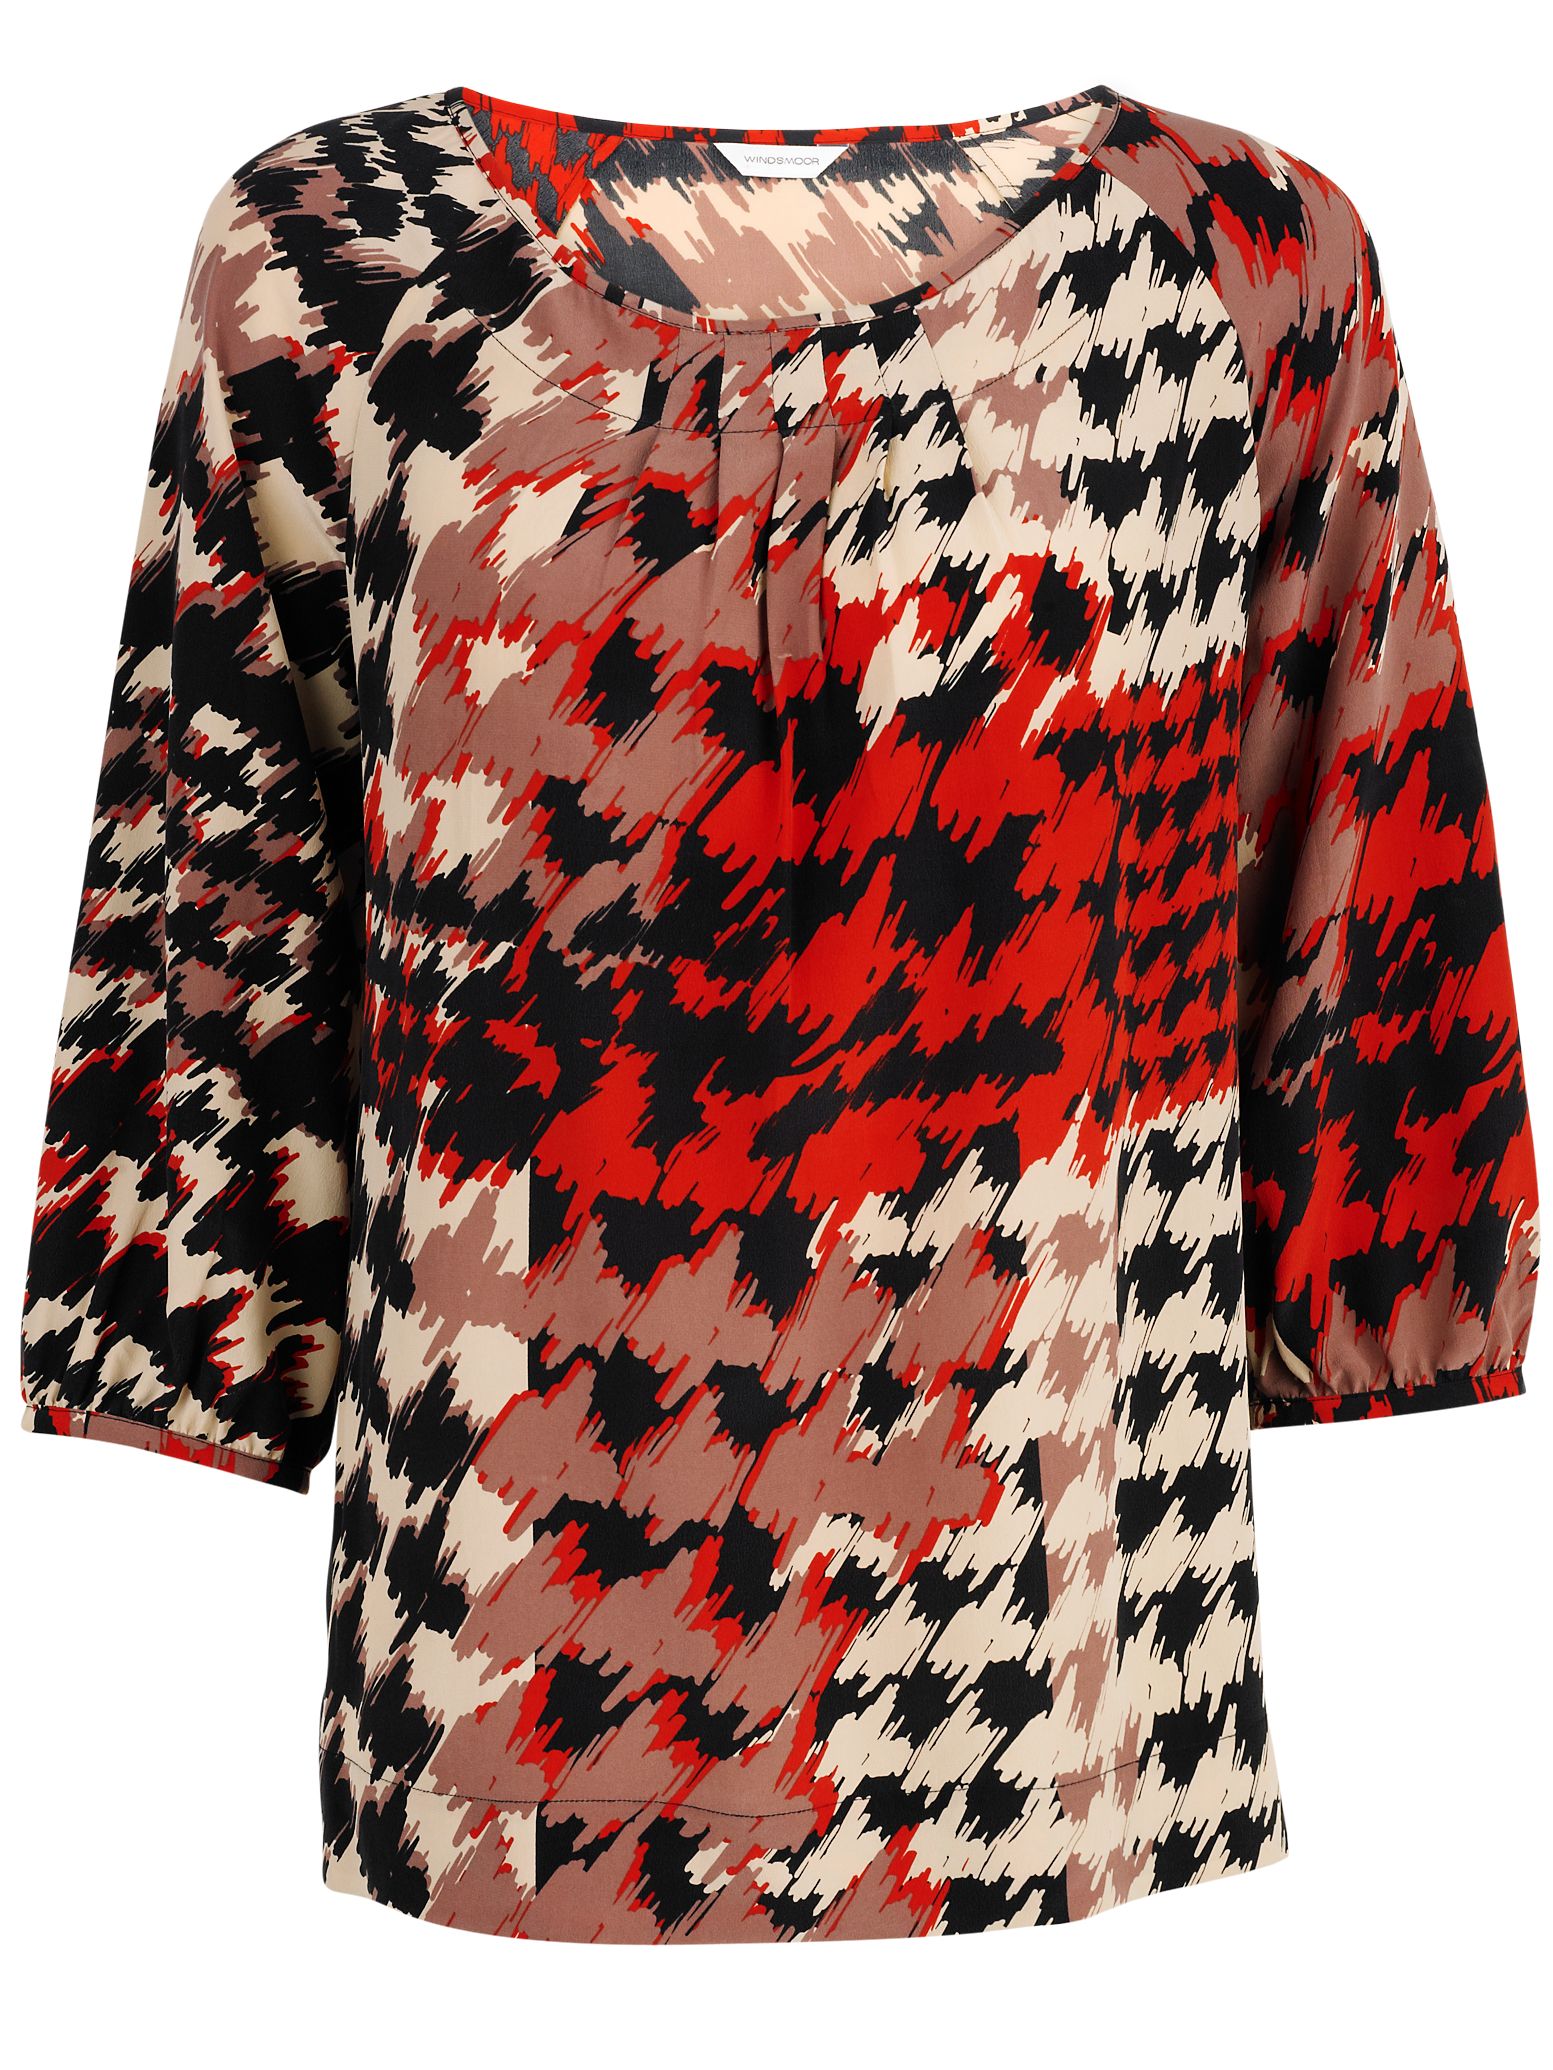 Windsmoor Dogtooth Smudge Blouse, Red/Black